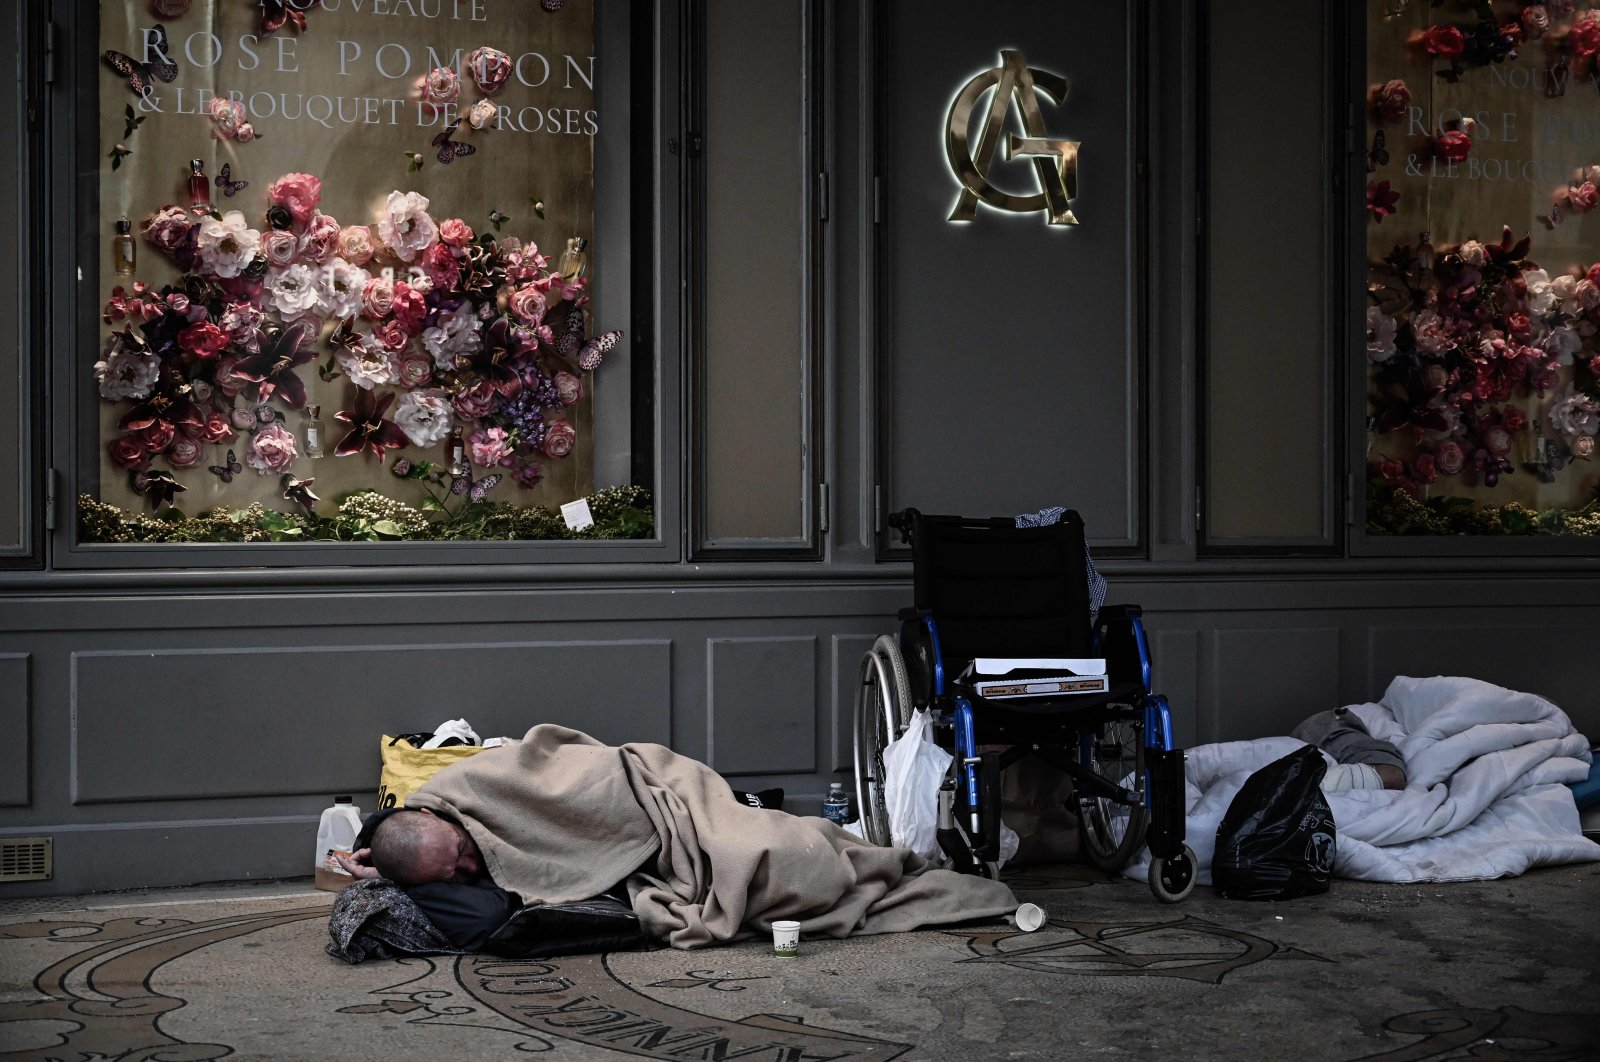 A homeless person sleeps in front of closed shops in Paris on April 17, 2020, on the 32nd day of a strict lockdown in France aimed at curbing the spread of the COVID-19 pandemic caused by the novel coronavirus. (AFP Photo)